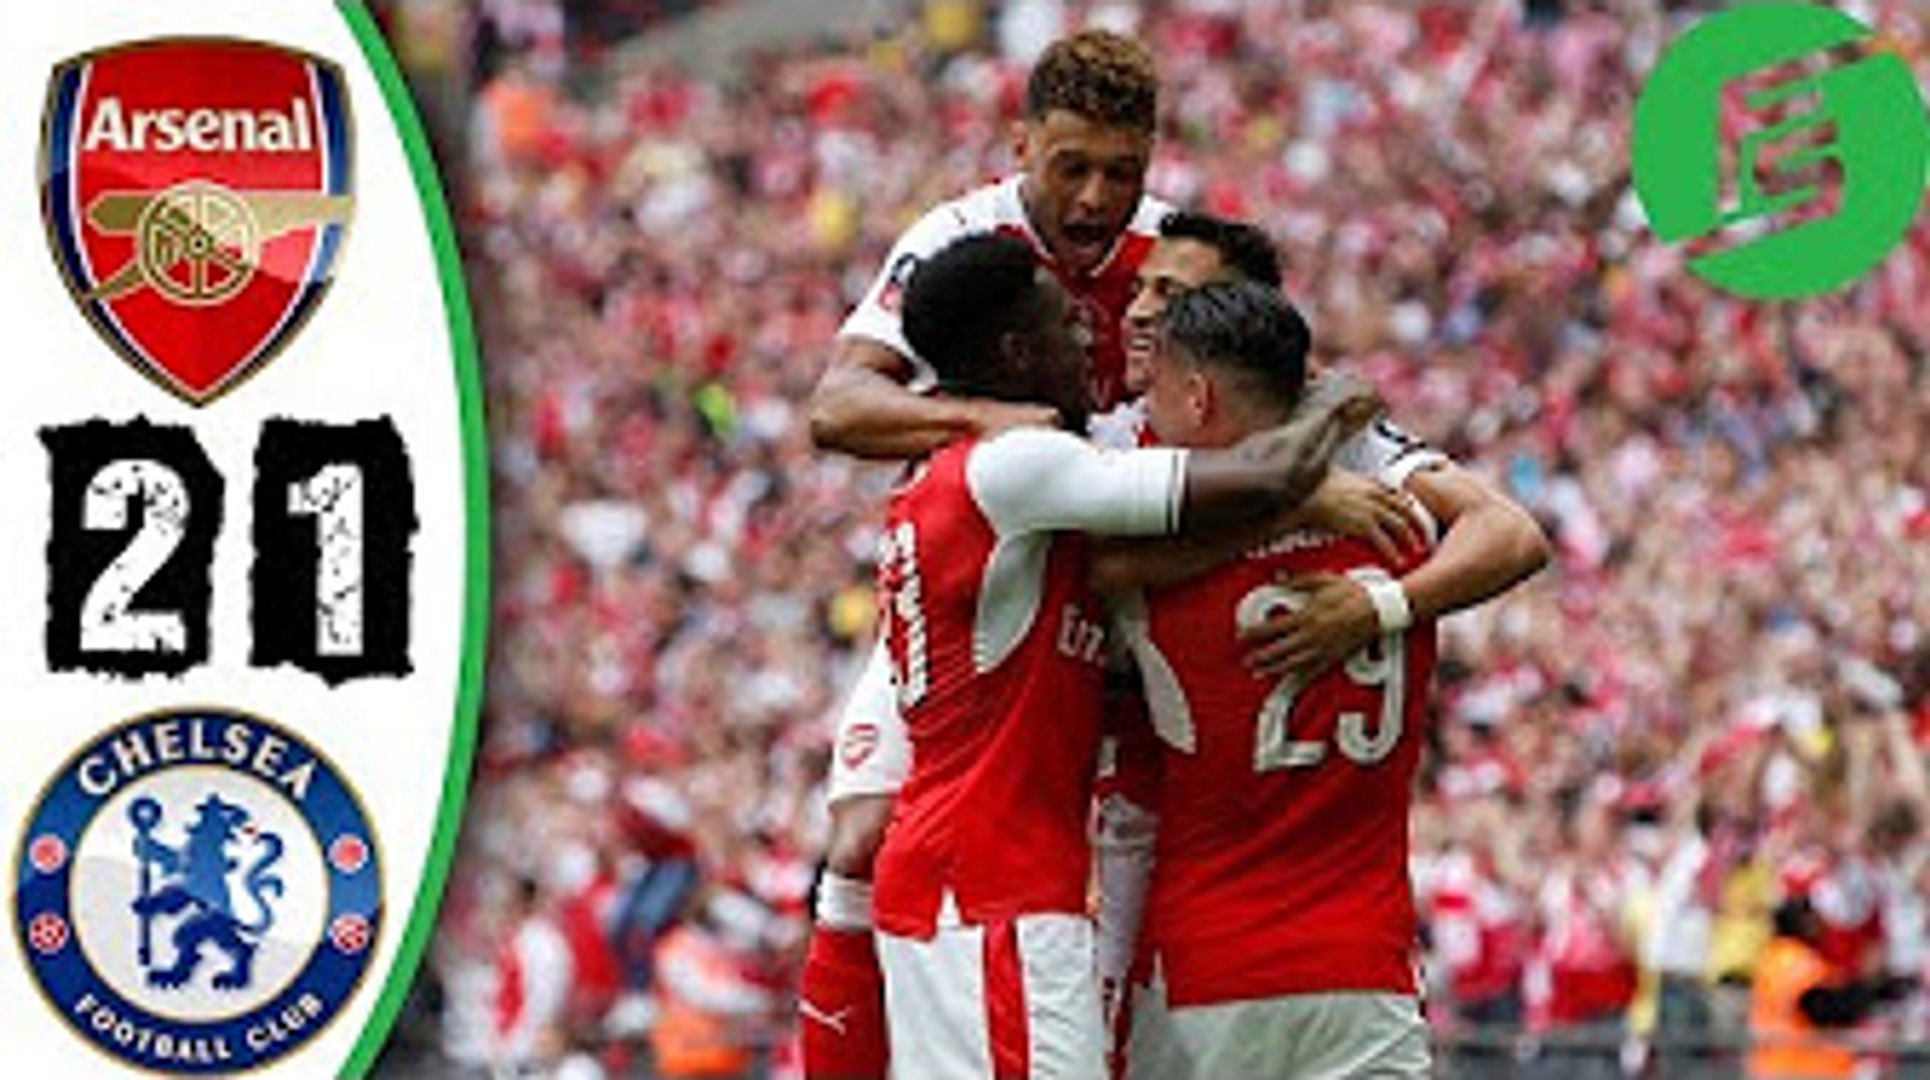 Arsenal vs Chelsea 2-1 - All Goals & Extended Highlights - FA Cup Final  27-05-2017 HD - video Dailymotion